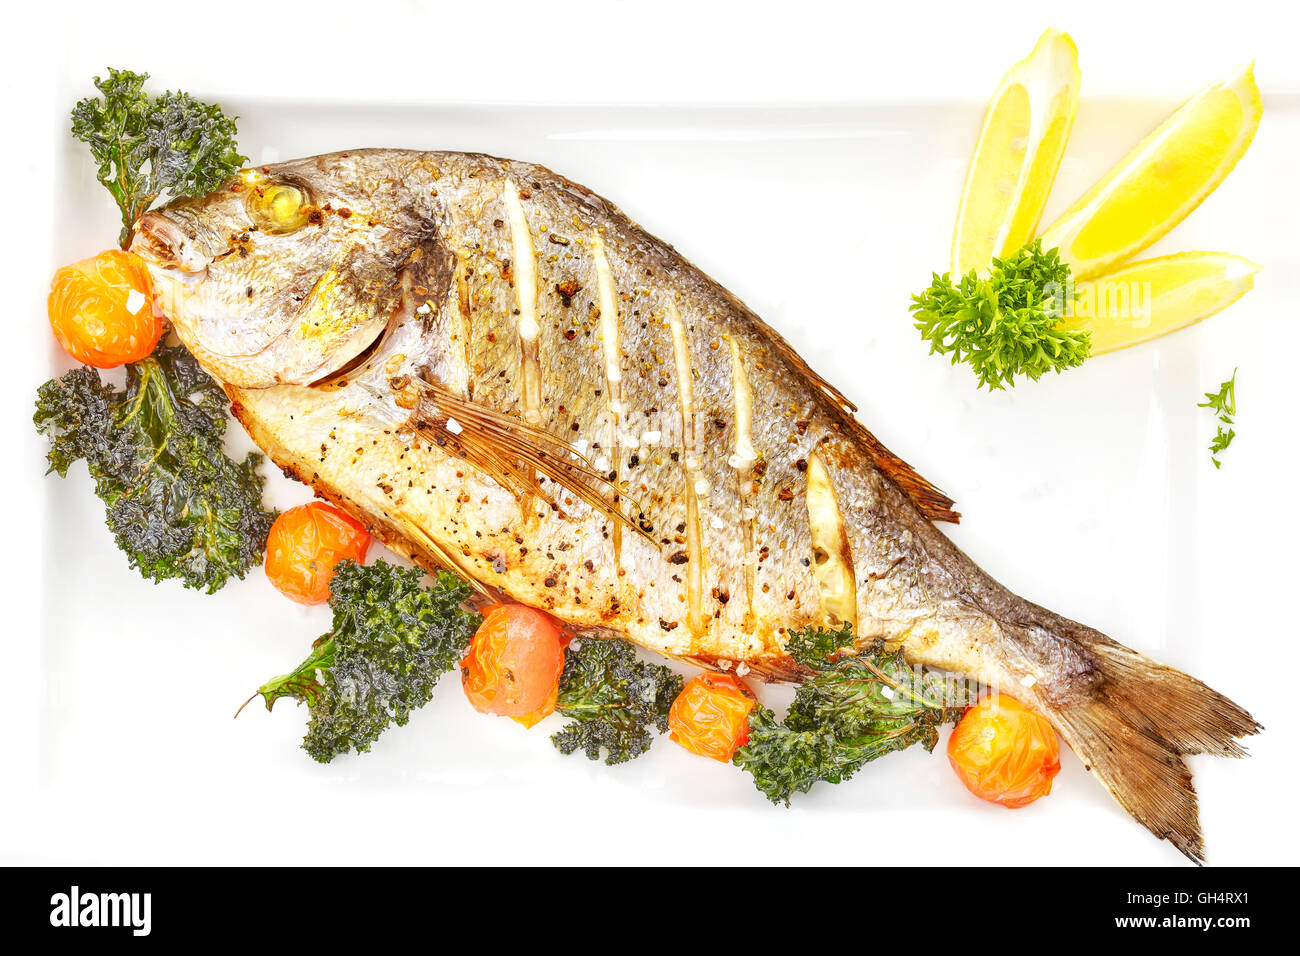 Roasted gilt head bream fish on a white plate with grilled tomatoes, kale and coarse grained salt. Stock Photo